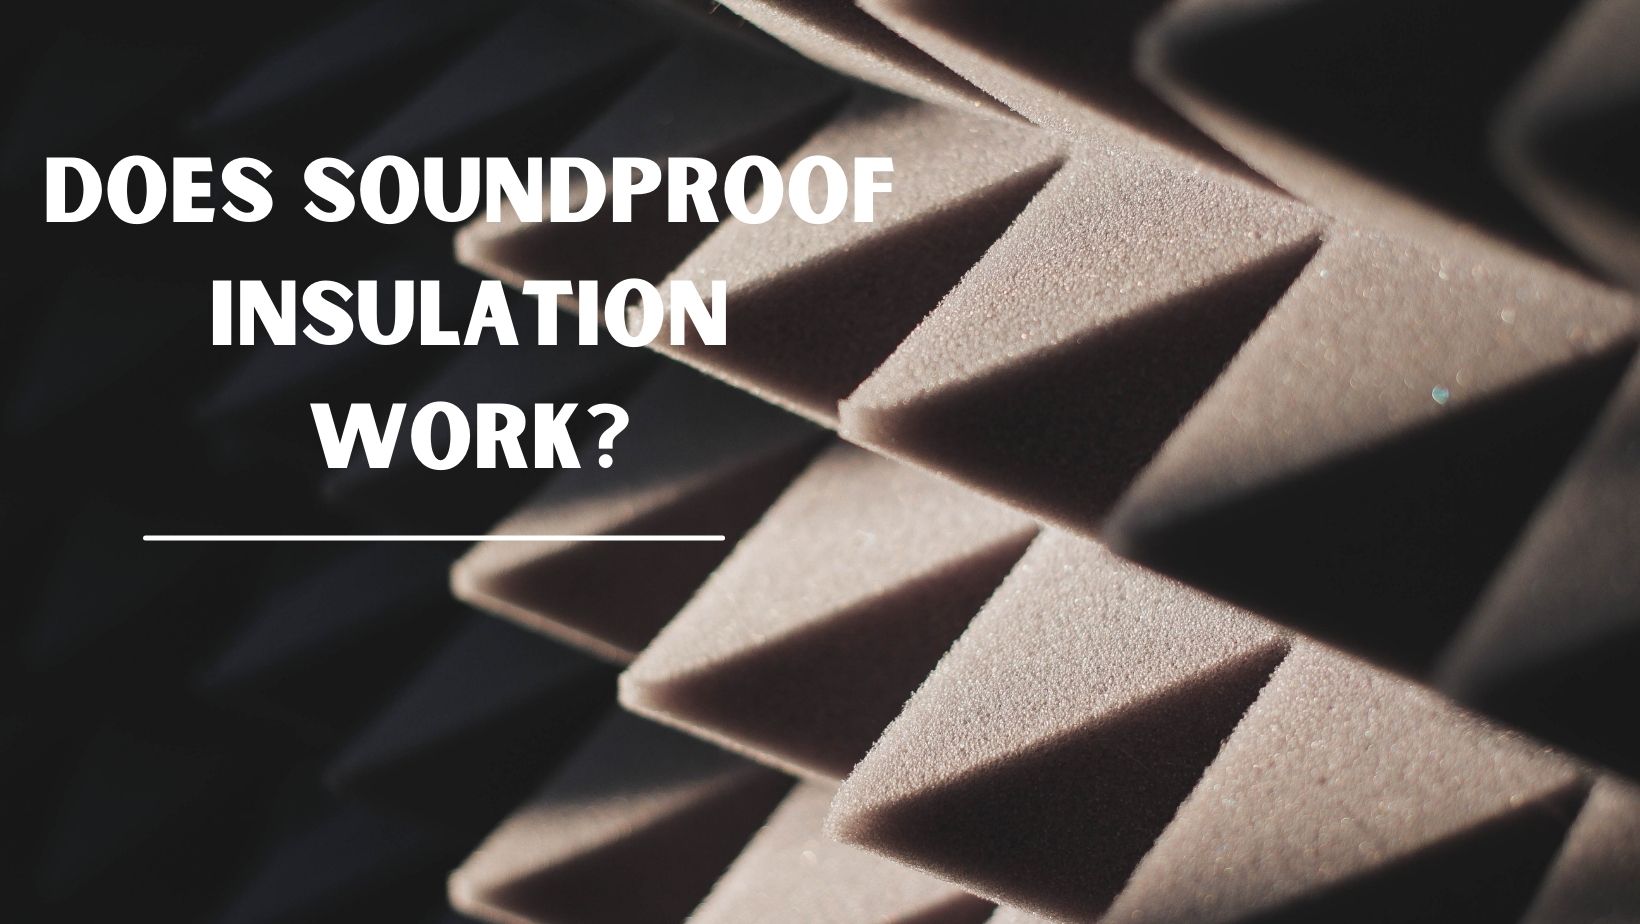 Does Soundproof Insulation Work?